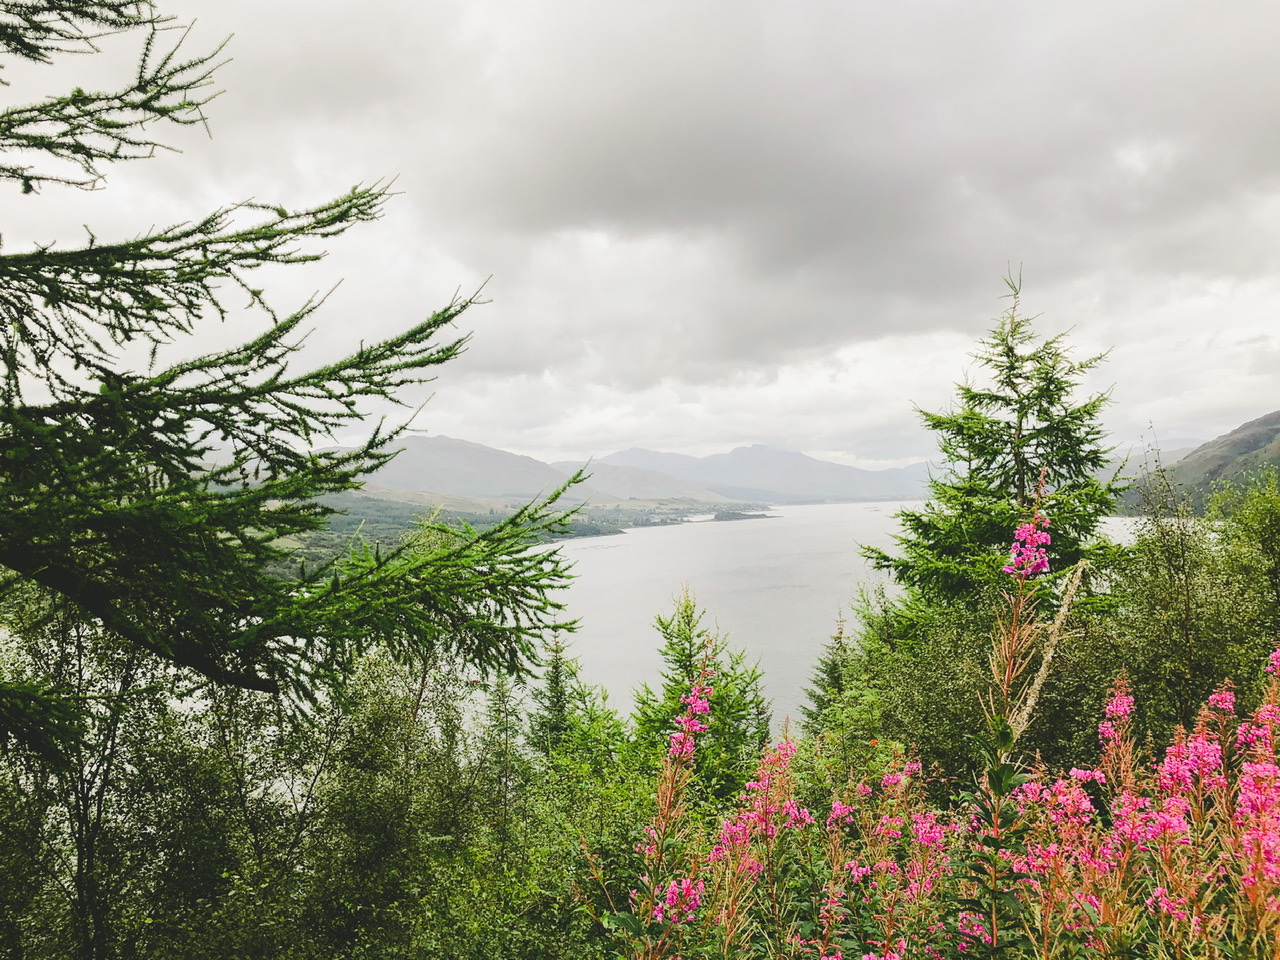 Views over Loch from a viewing point with green trees and a bush with pink flowers in foreground